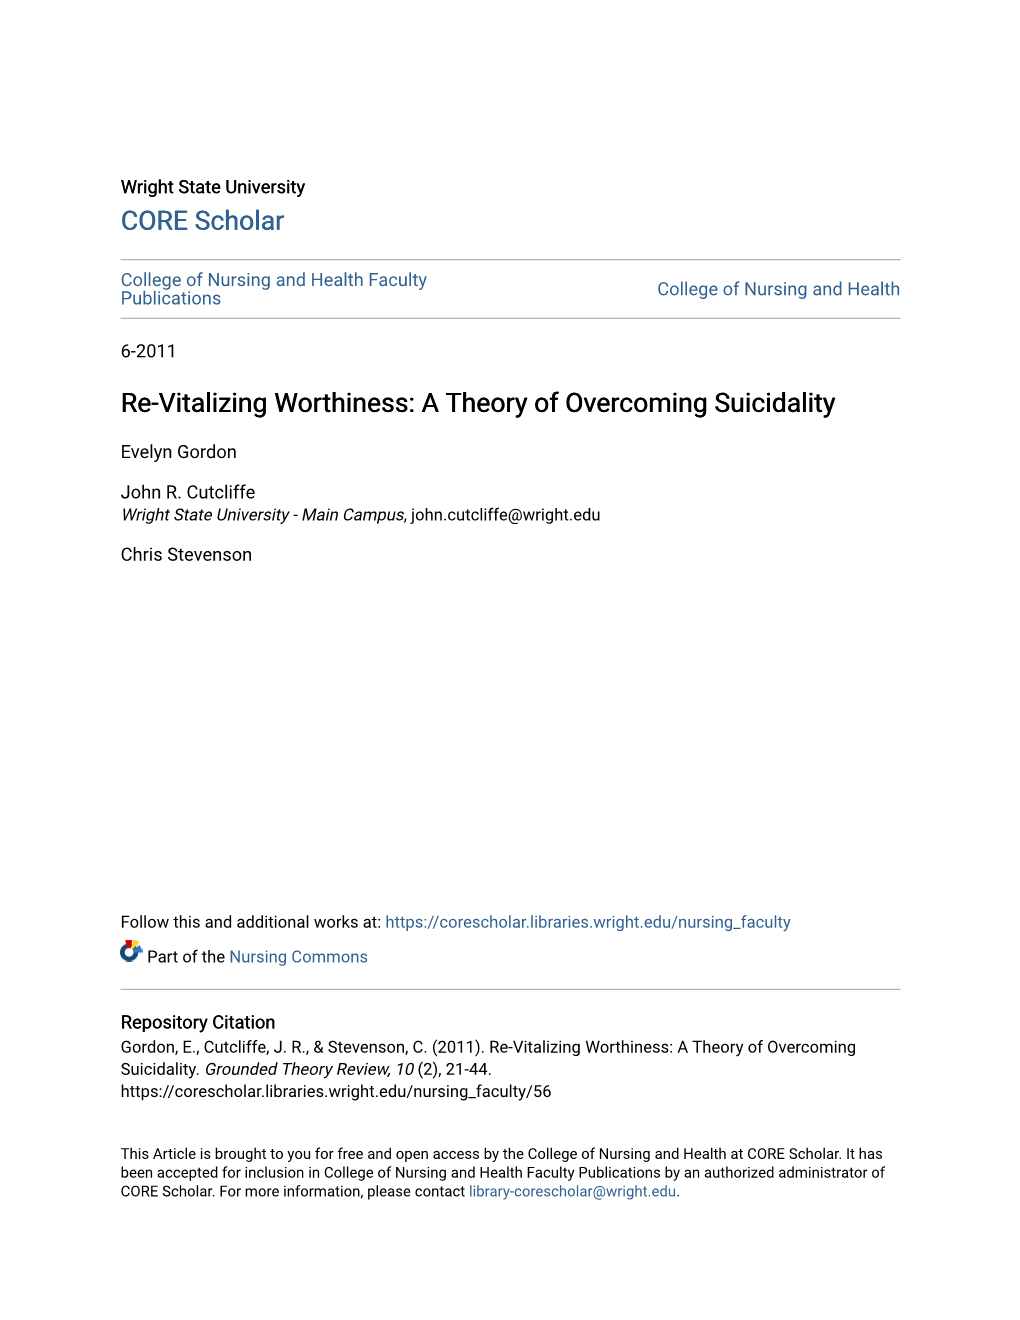 A Theory of Overcoming Suicidality